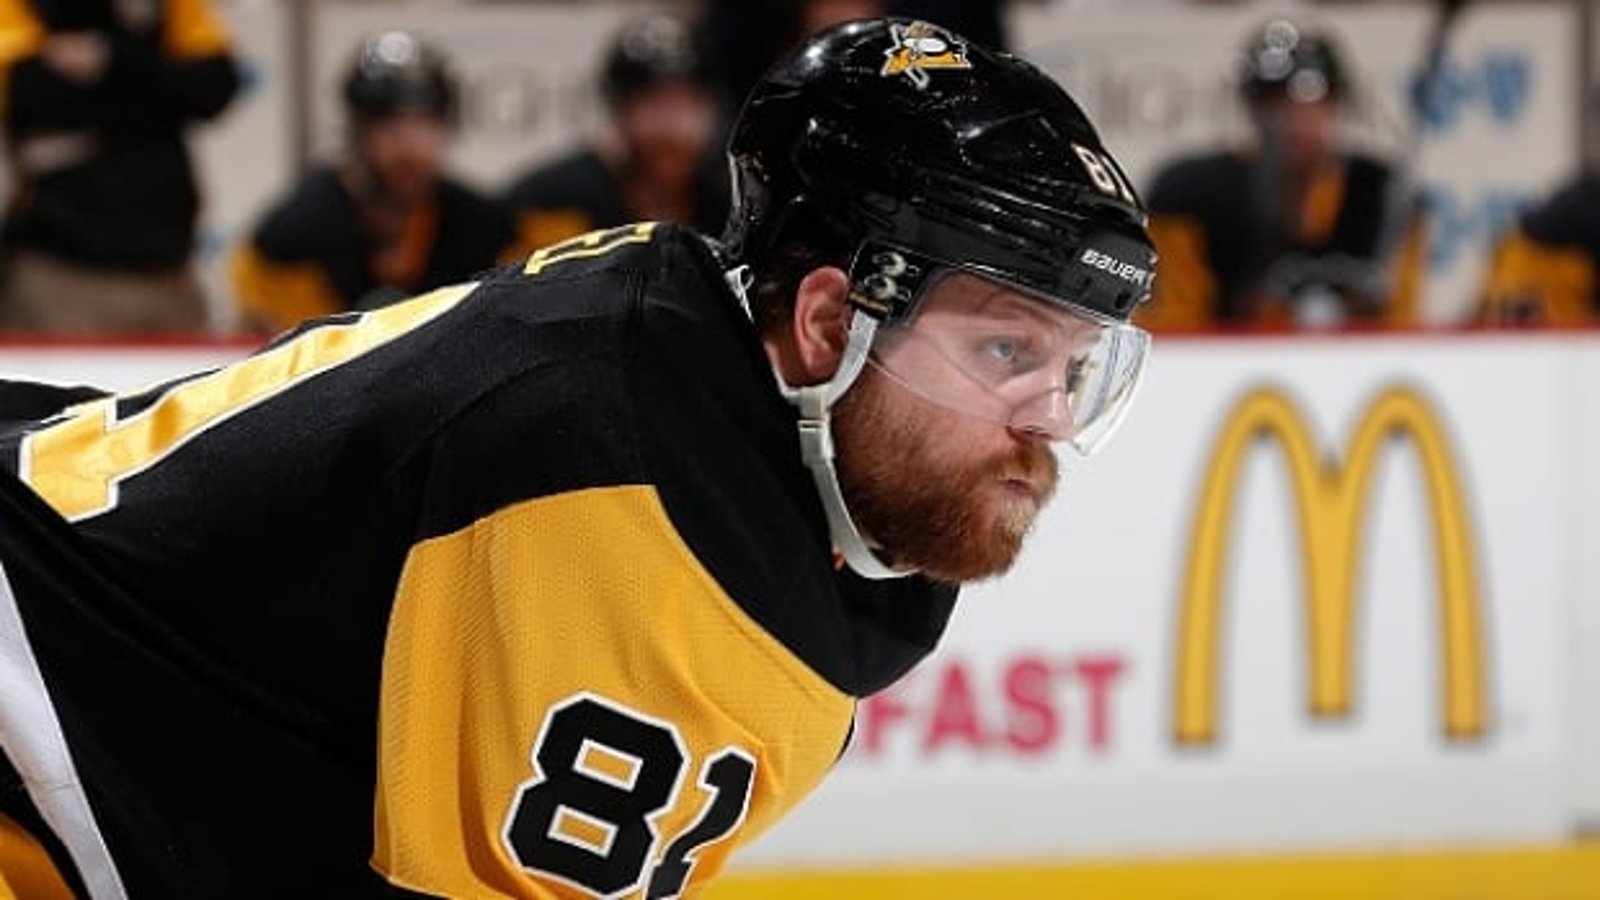 Kessel is excited about winning free Big Macs for Penguins fans! 